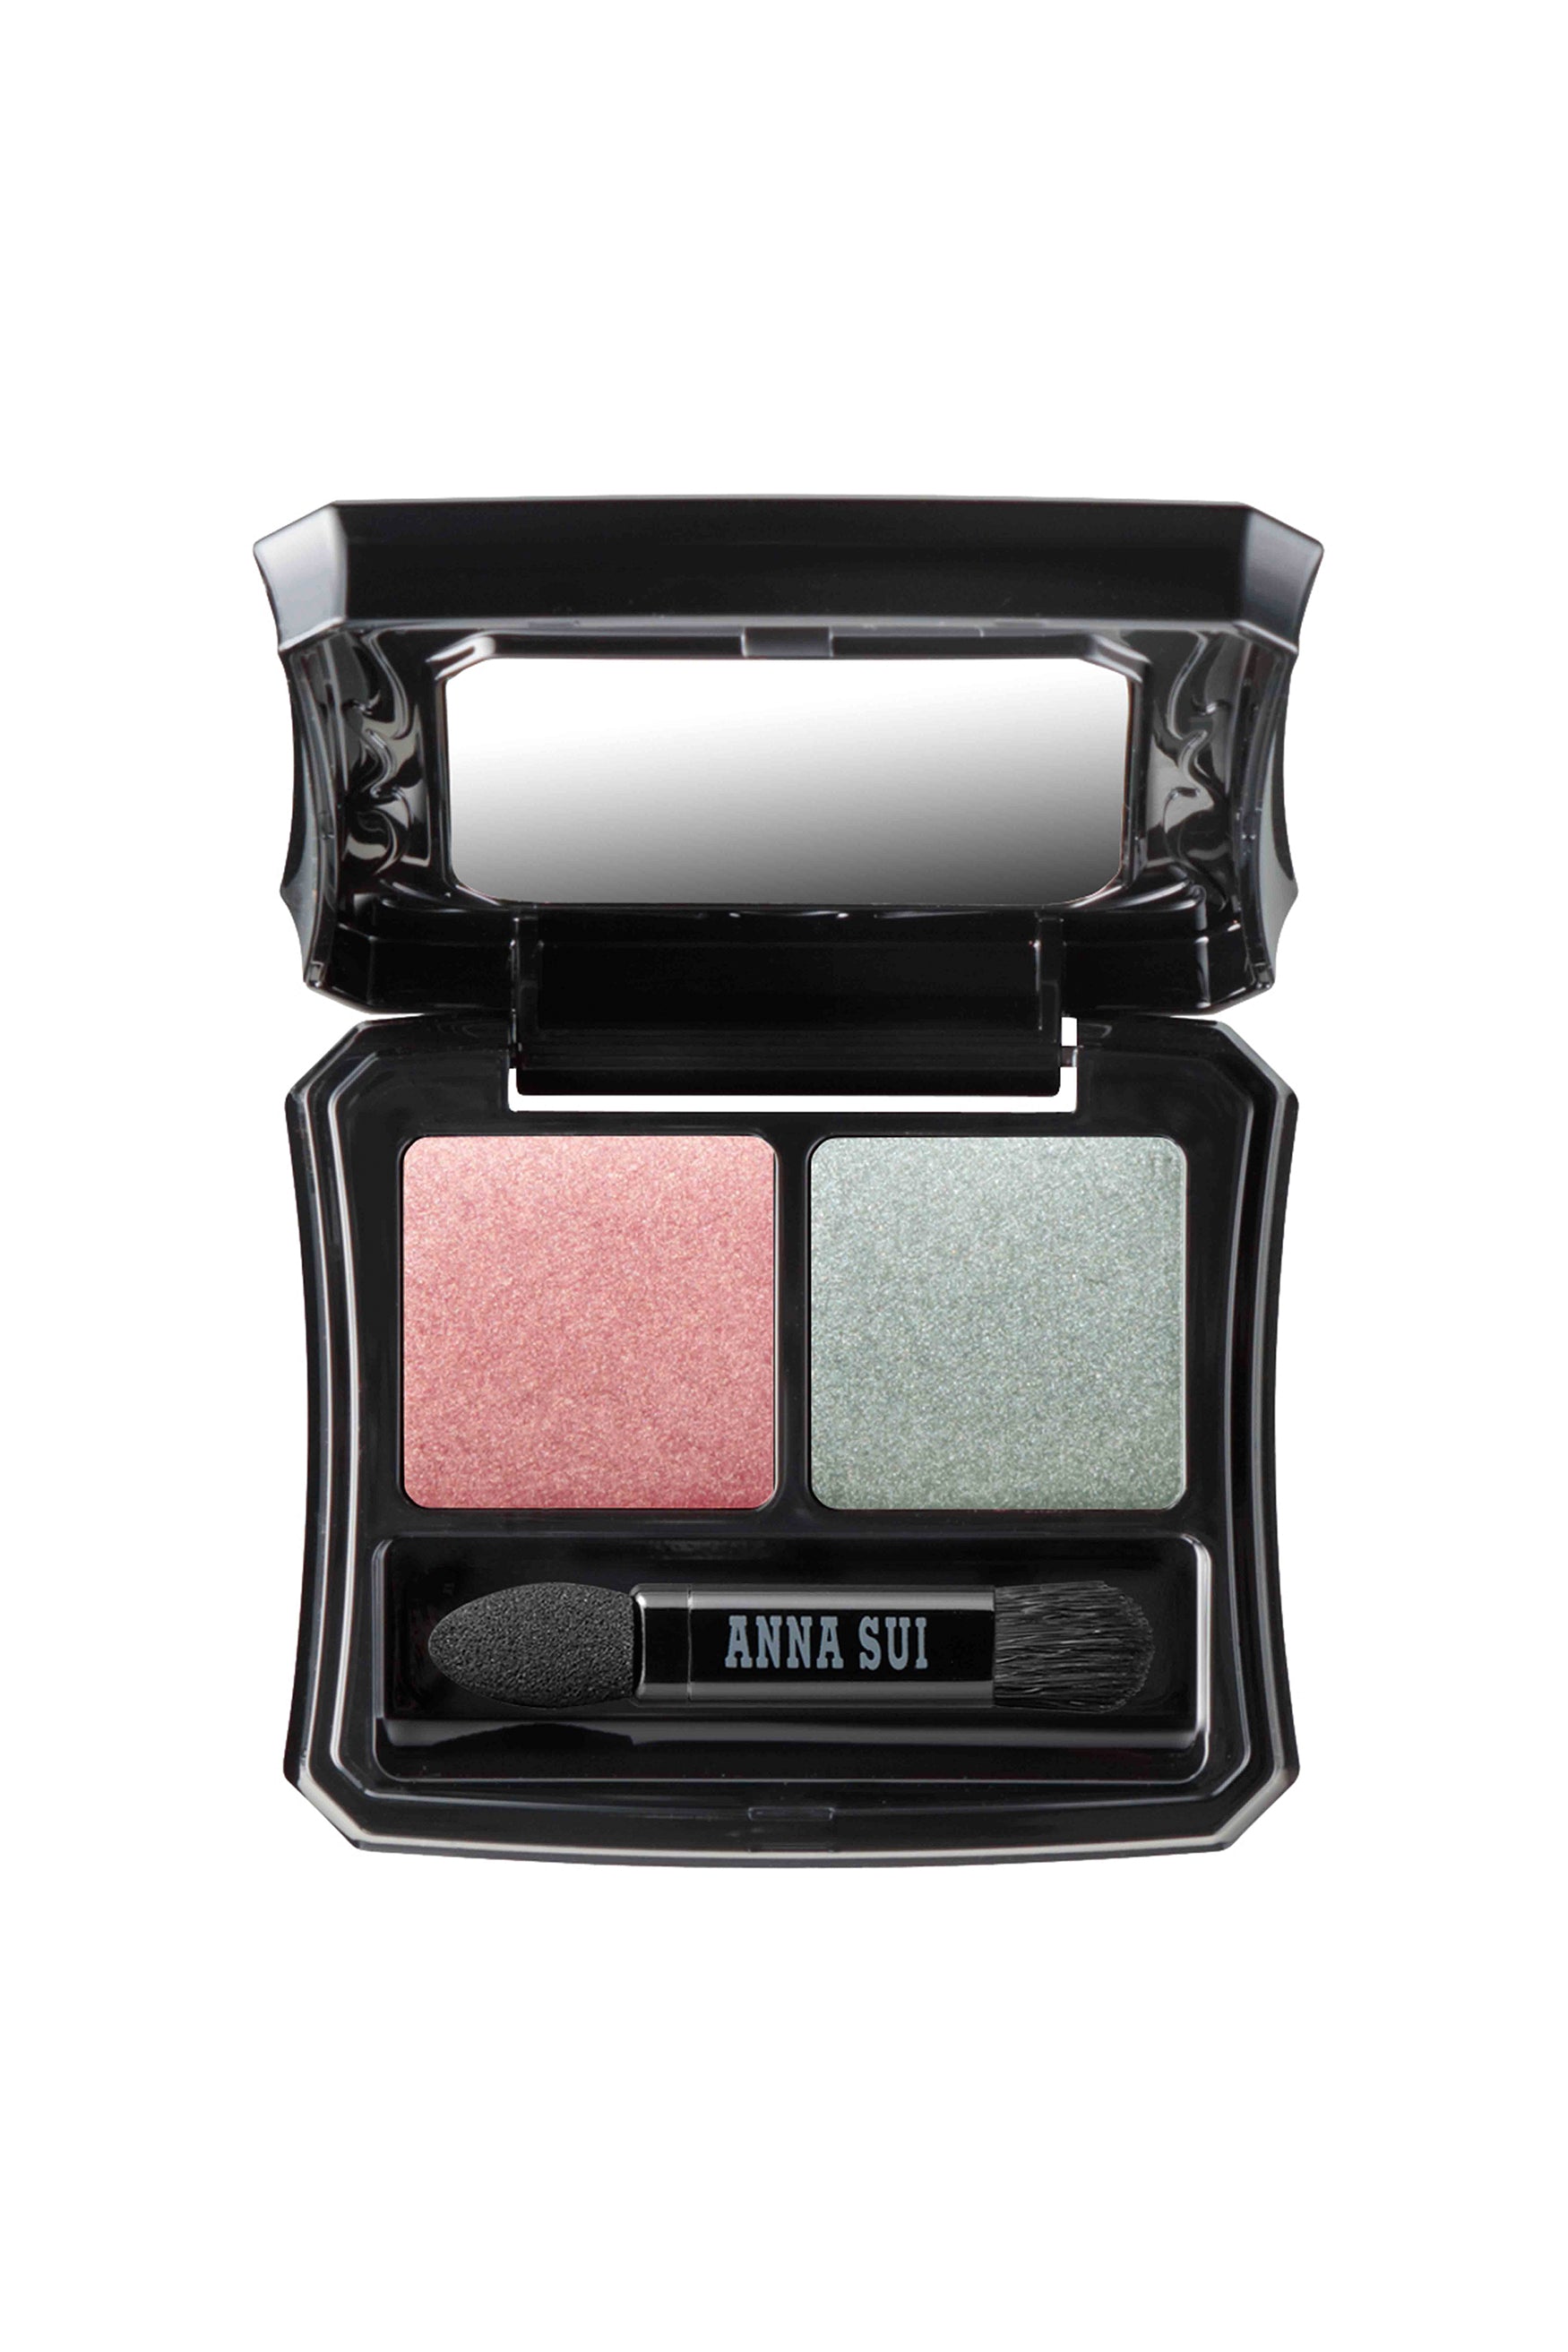 PETAL & LEAF in a square container with curvy sides, with Anna Sui applicator & mirror